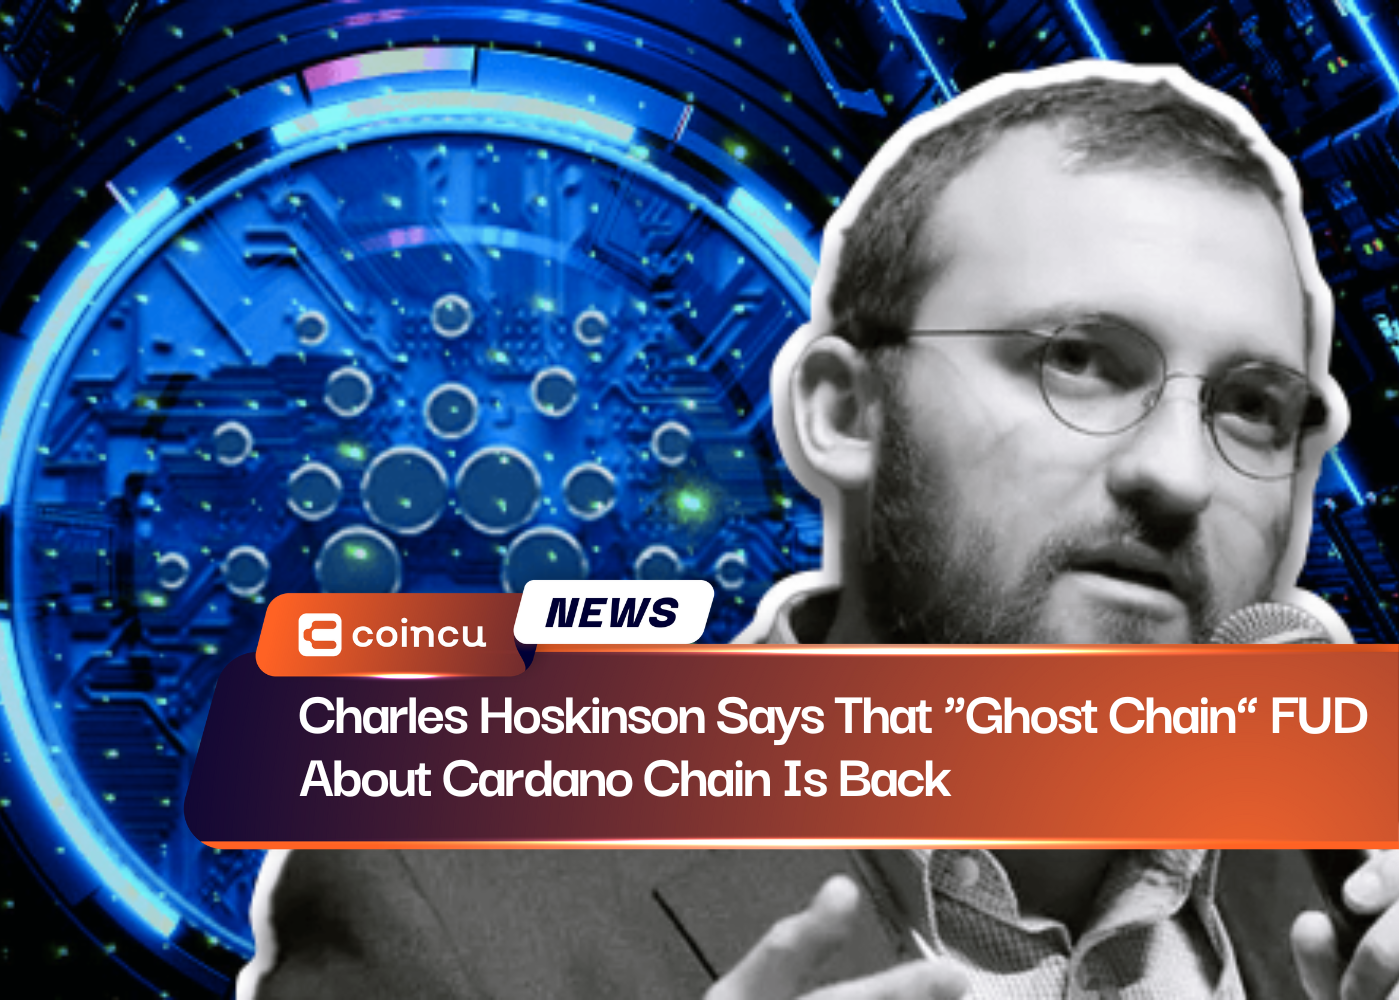 Charles Hoskinson Says That “Ghost Chain” FUD About Cardano Chain Is Back